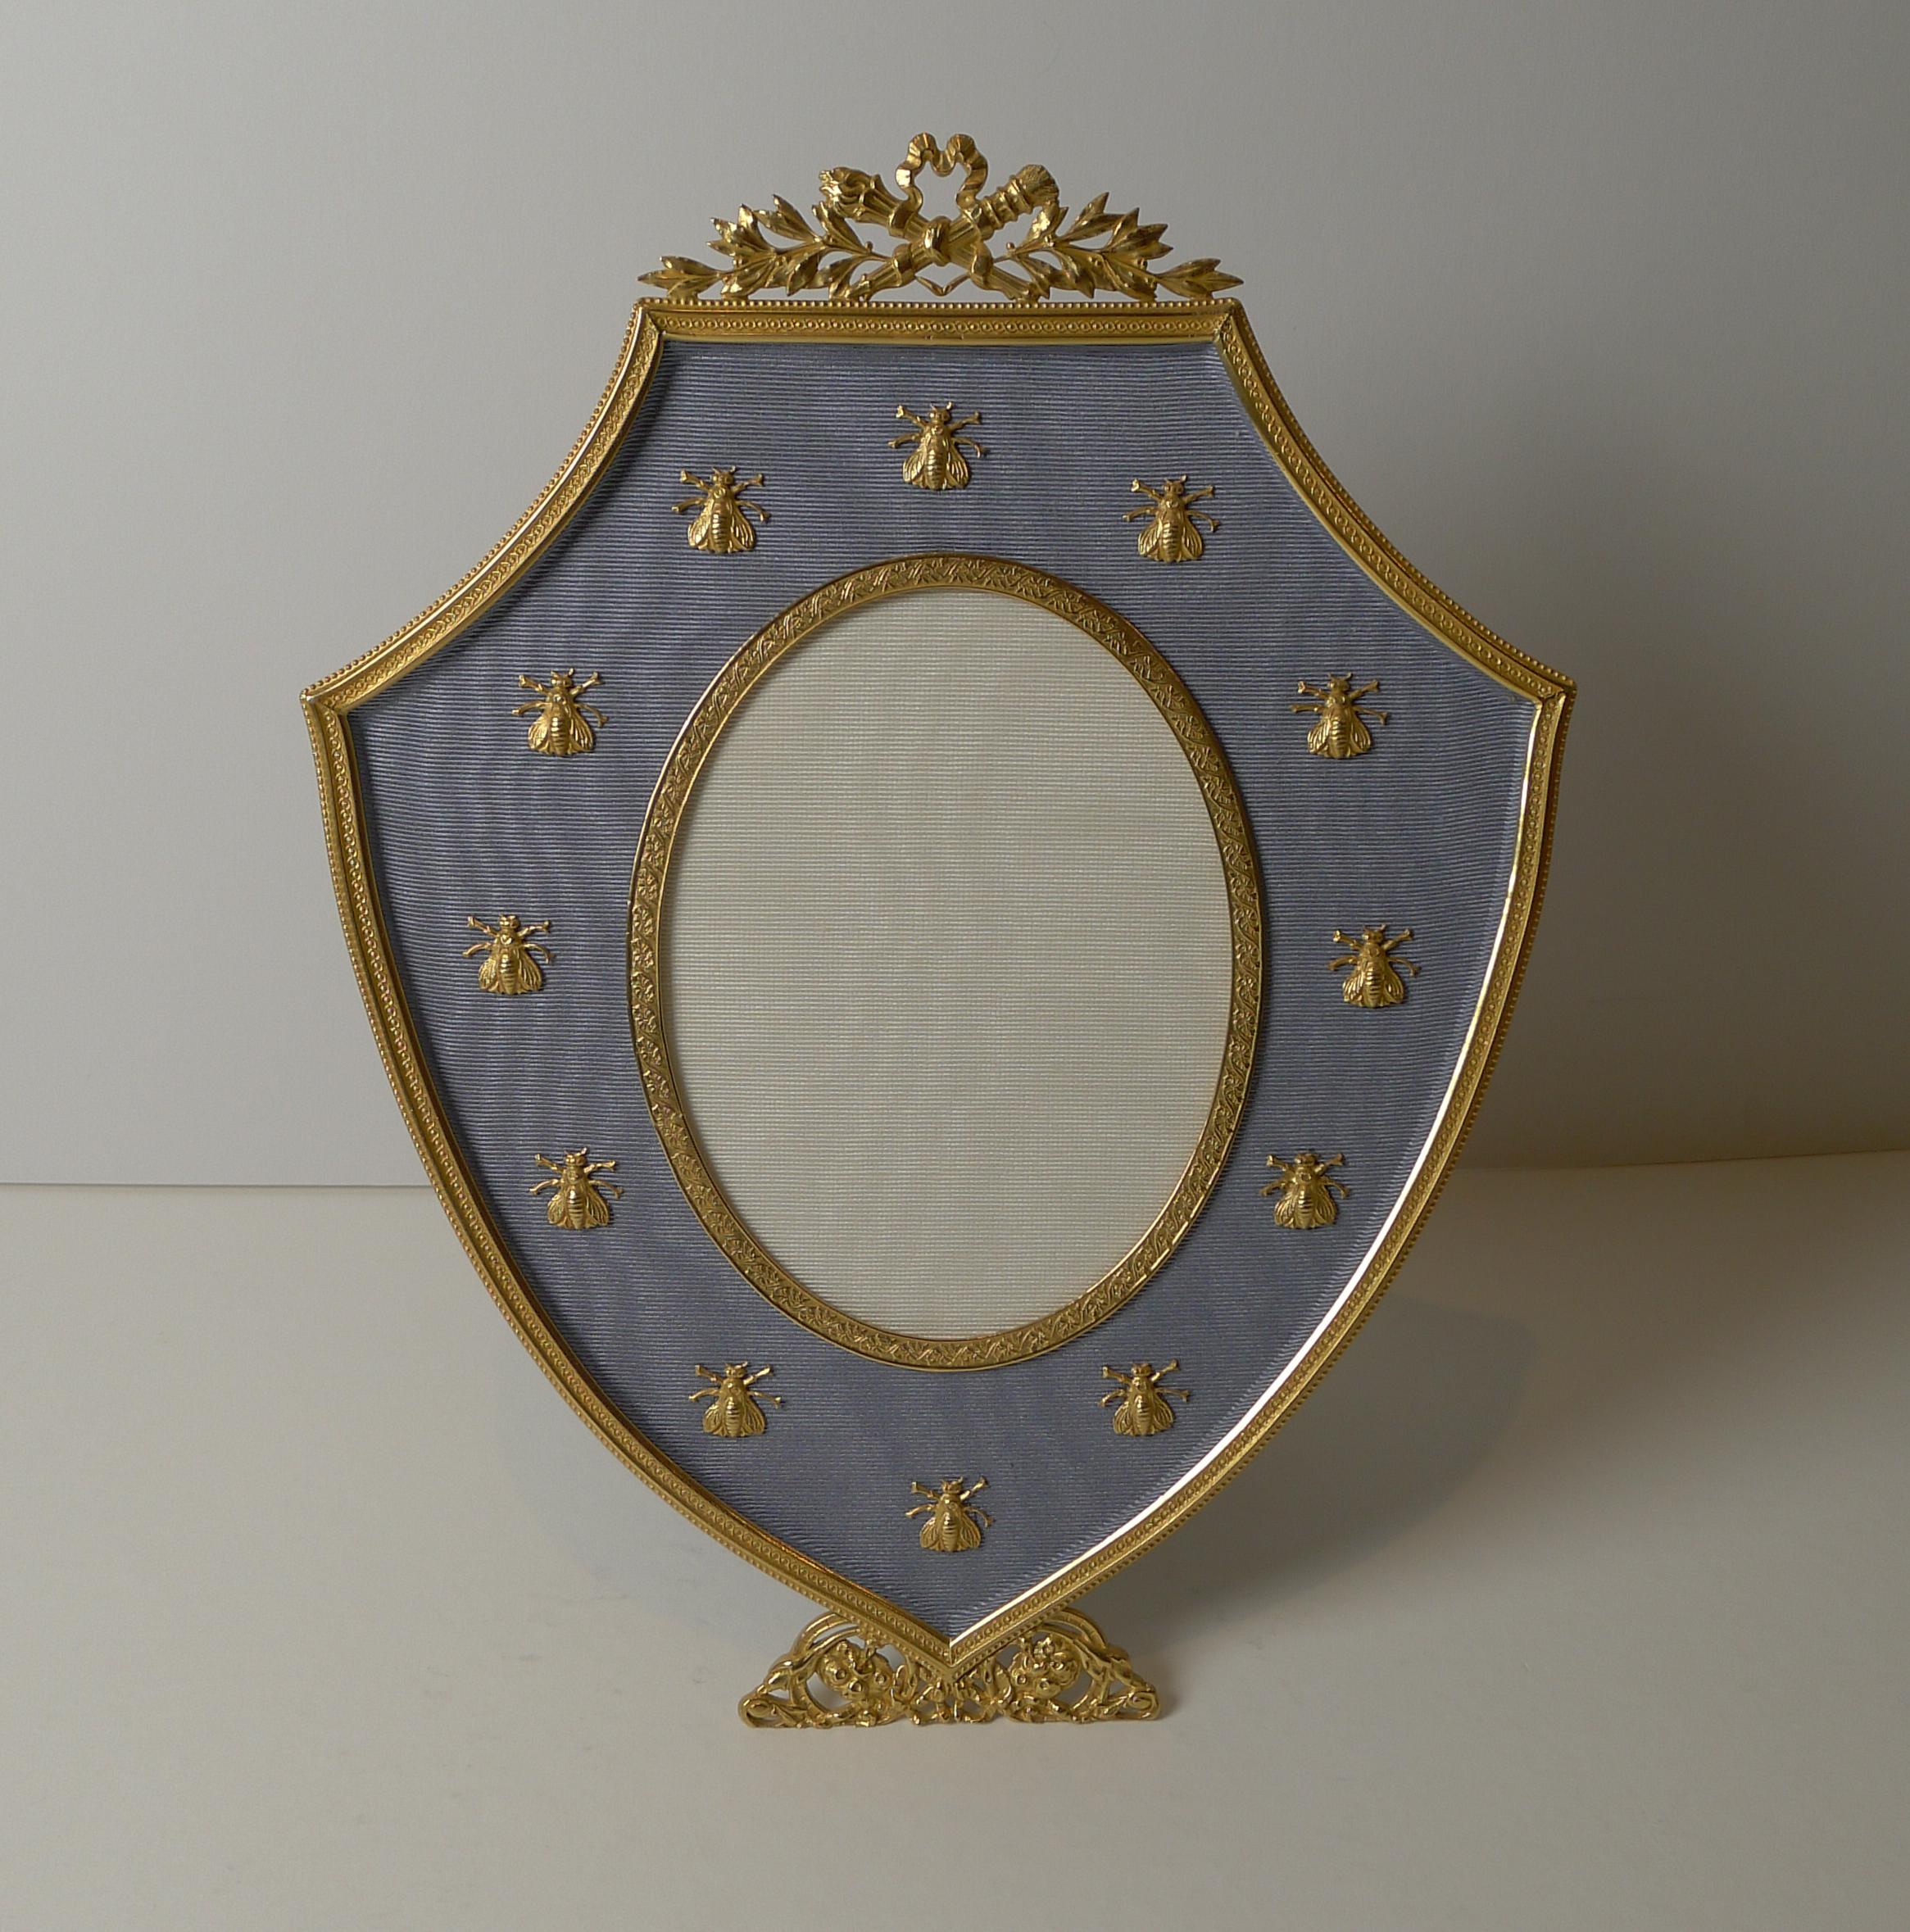 A stunning shaped picture frame made from bronze and smothered in gold, beautifully cleaned and restored to it's former glory dating to c.1900.

These frames with gilded bronze Napoleonic bees are always highly sought-after and particularly hard